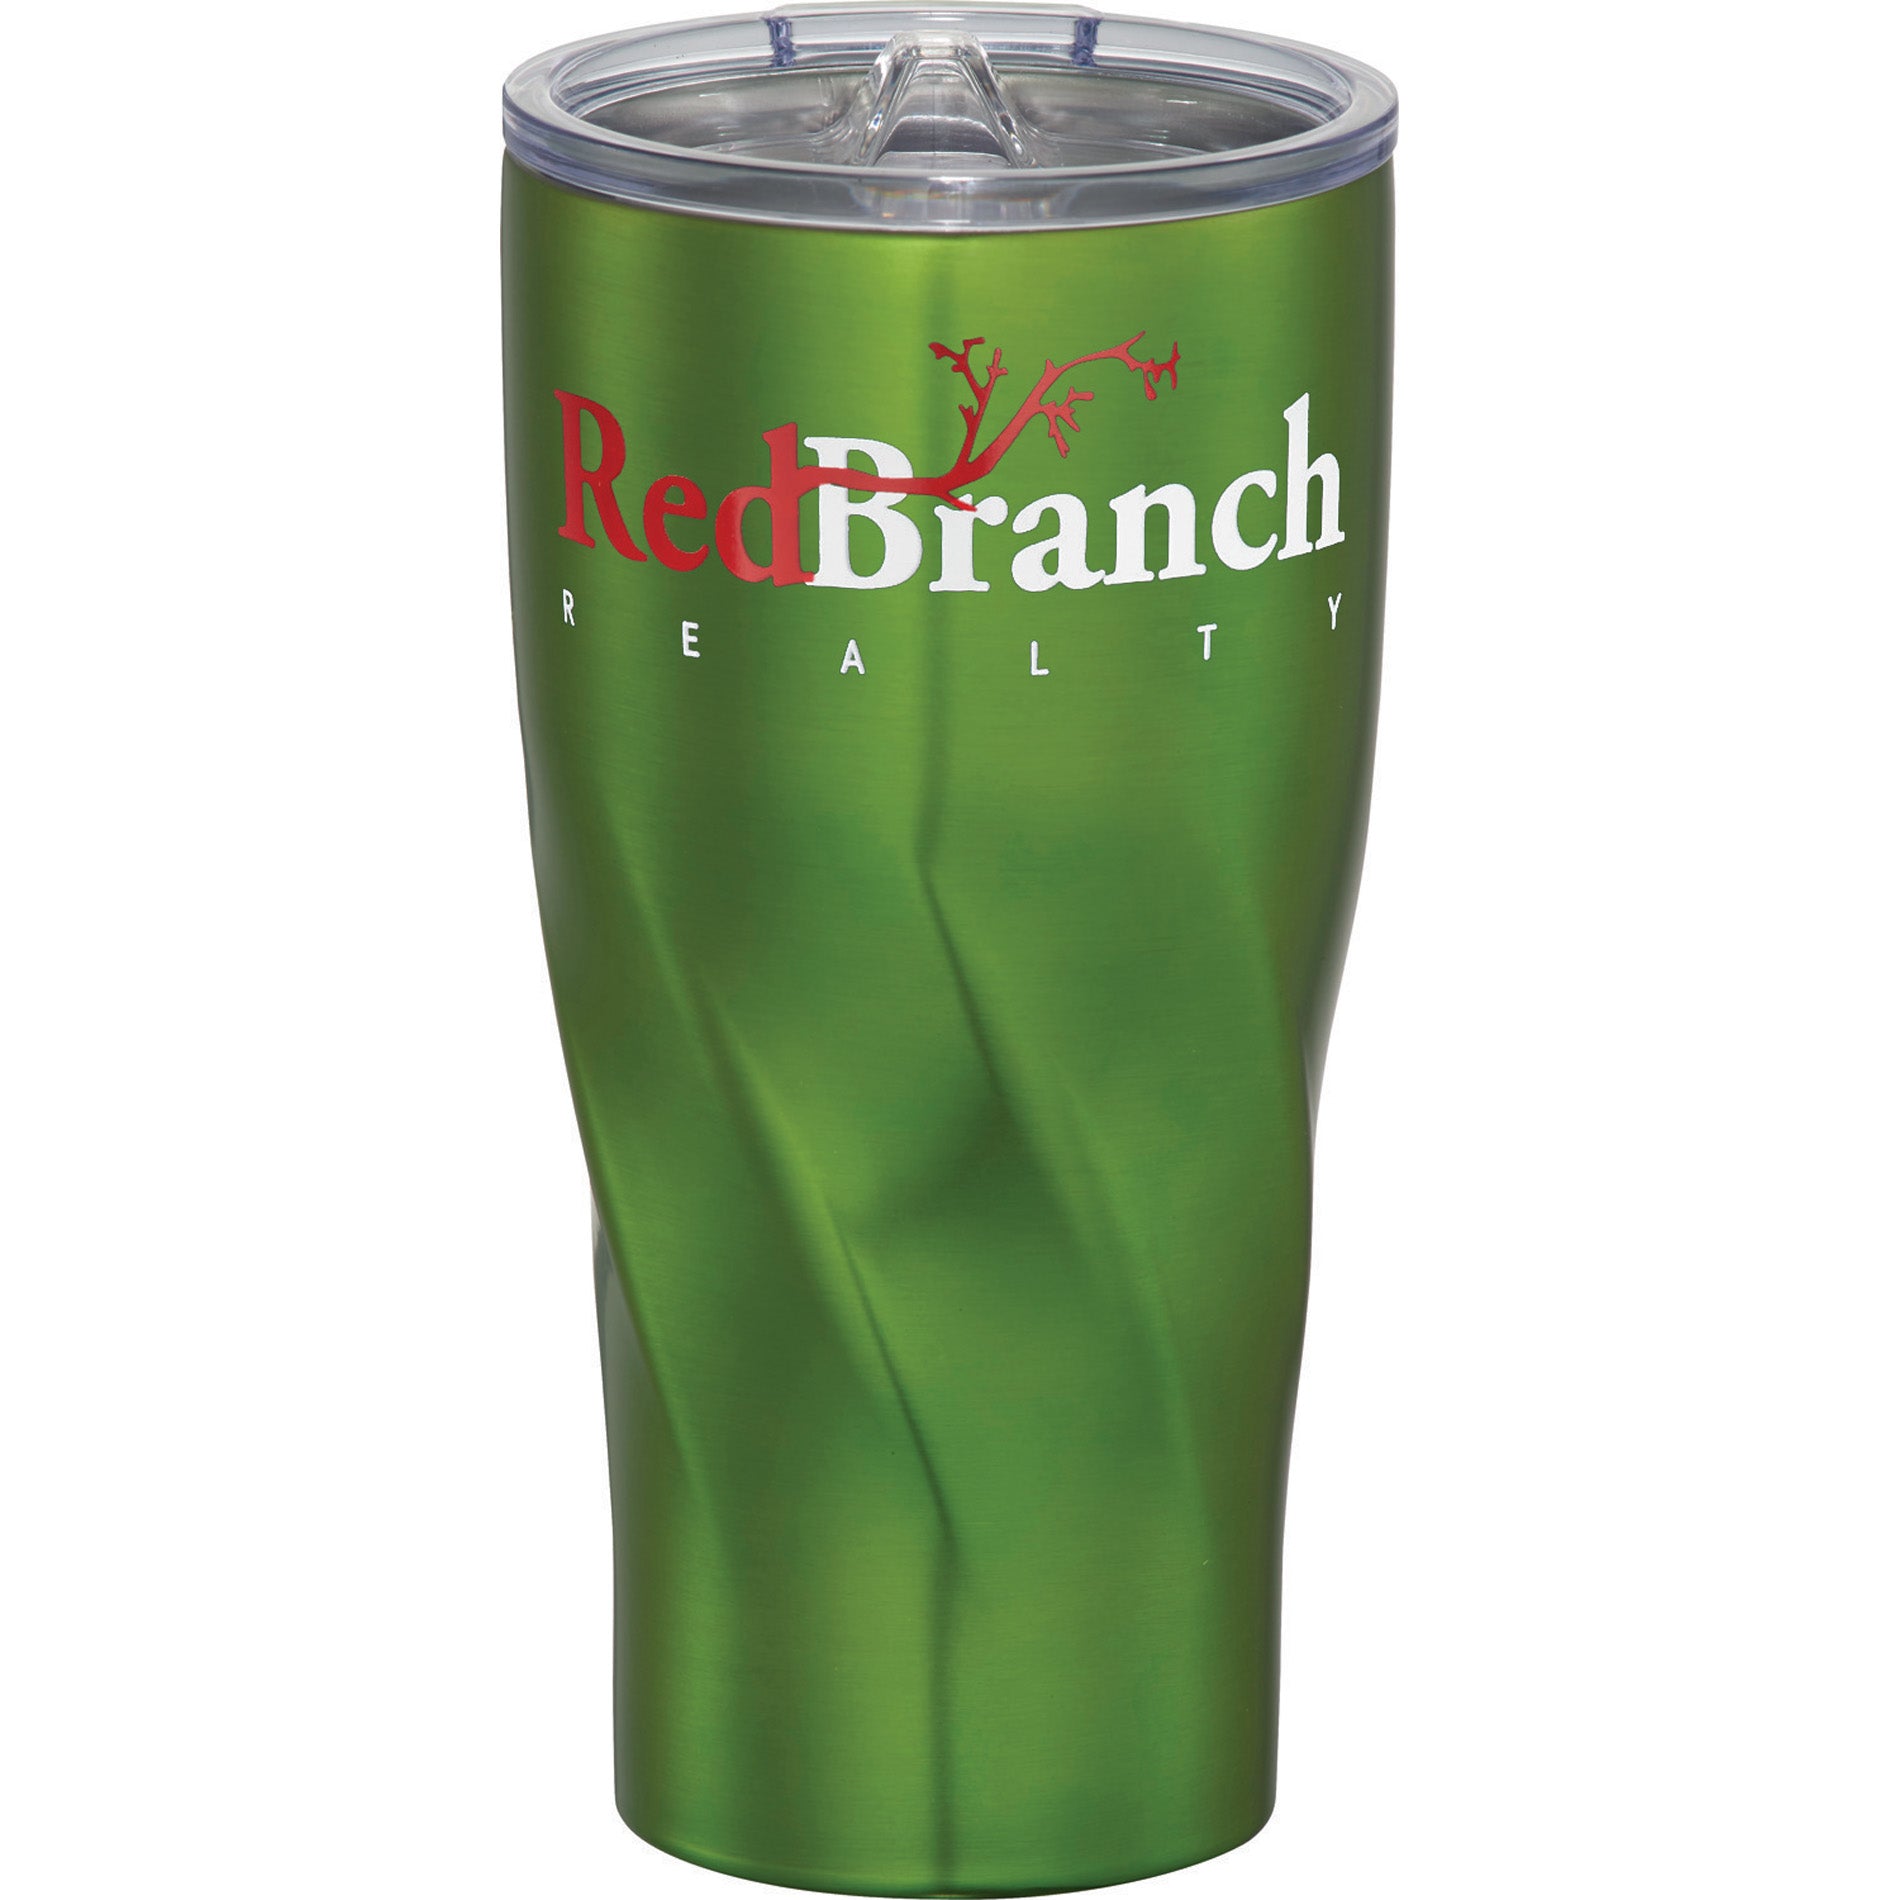 Custom 20 oz. Stainless Steel Insulated Tumbler - Smooth